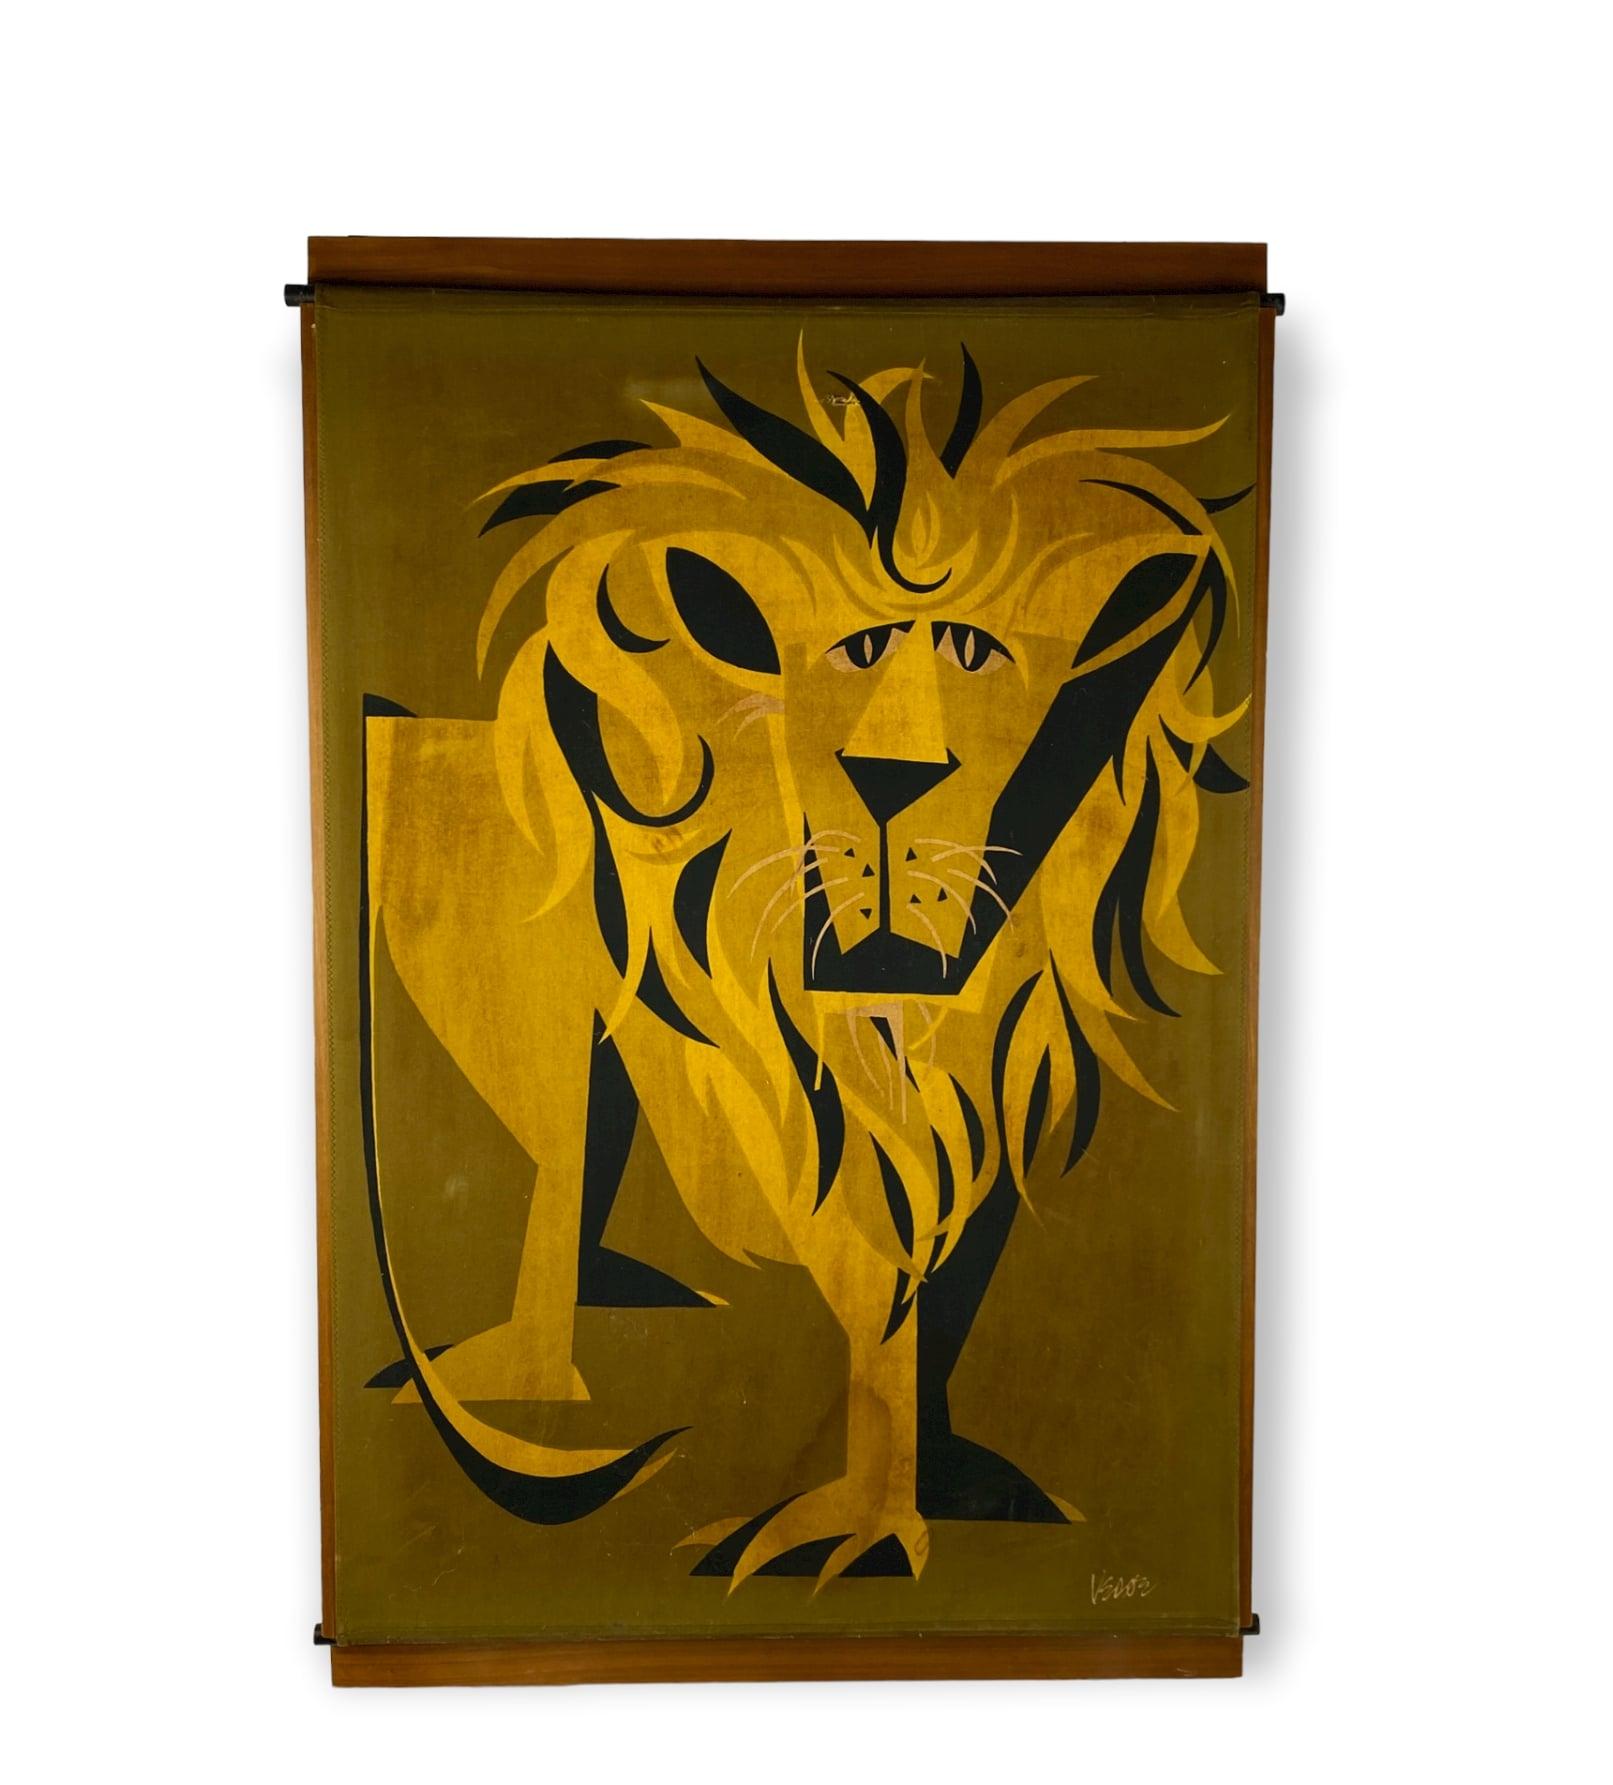 Midcentury wooden panel, covered with fabric decorated with a lion figure. Signed.

Italy 1960s.

The object is the door of a custom-made cabinet that covered a radiator. It comes from the custom-made furniture designed by Ignazio Gardella and